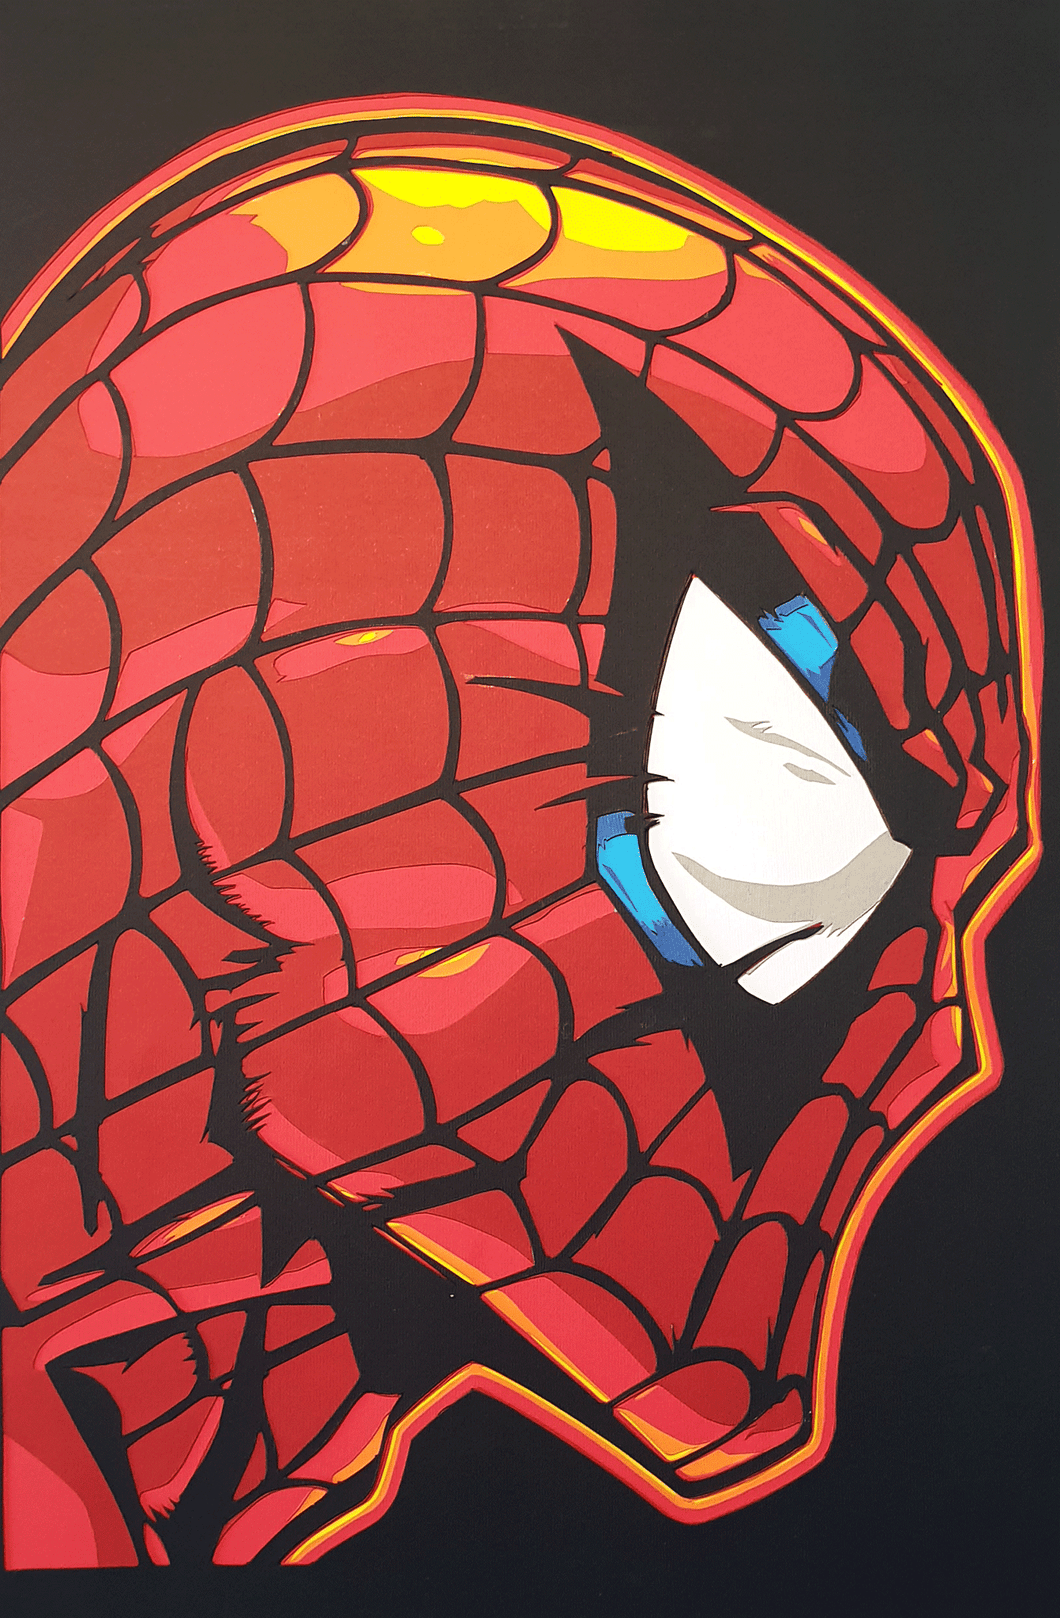 Spiderman Face off by Rick Sharif [A3 Size (297 x 420 mm) (11.7 x 16.5 in) in a FRAME]